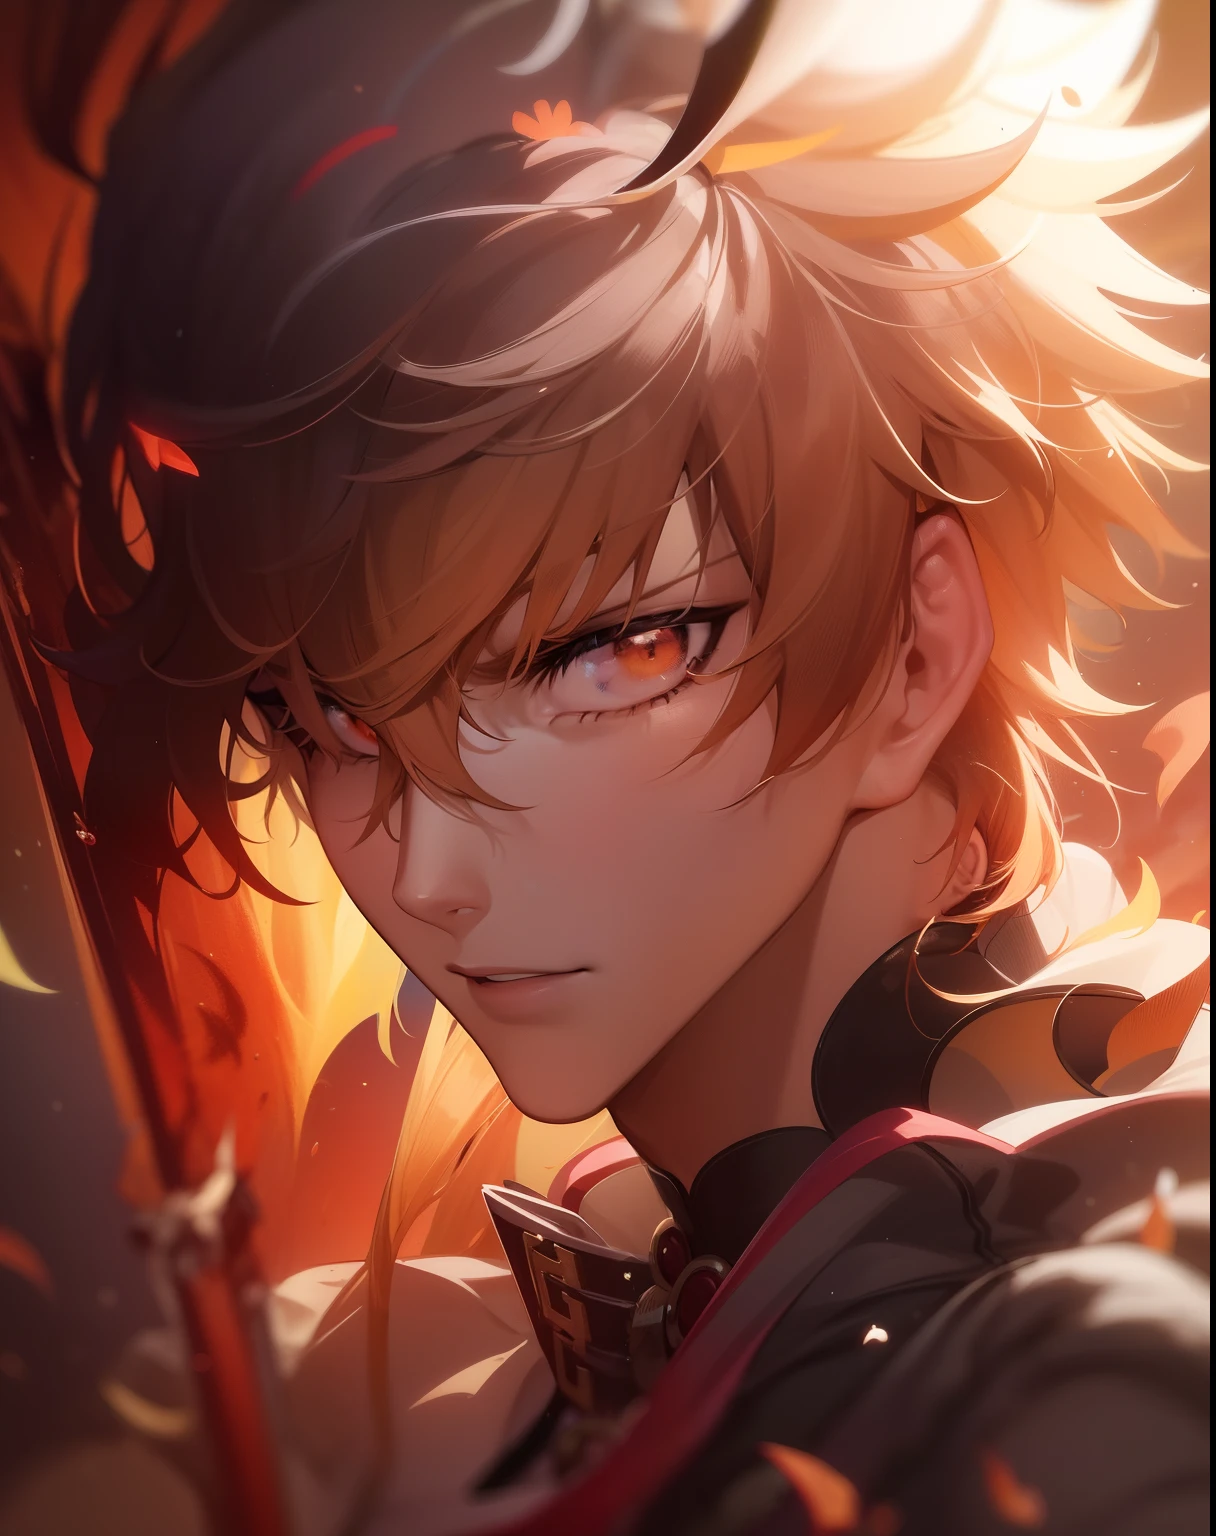 a close up of a person with a fire on their head, orange - haired anime boy, badass anime 8 k, fire behind him, handsome guy in demon slayer art, hd anime wallaper, anime wallaper, male anime character, 4k anime wallpaper, anime wallpaper 4 k, anime wallpaper 4k, 4 k manga wallpaper, detailed anime character art